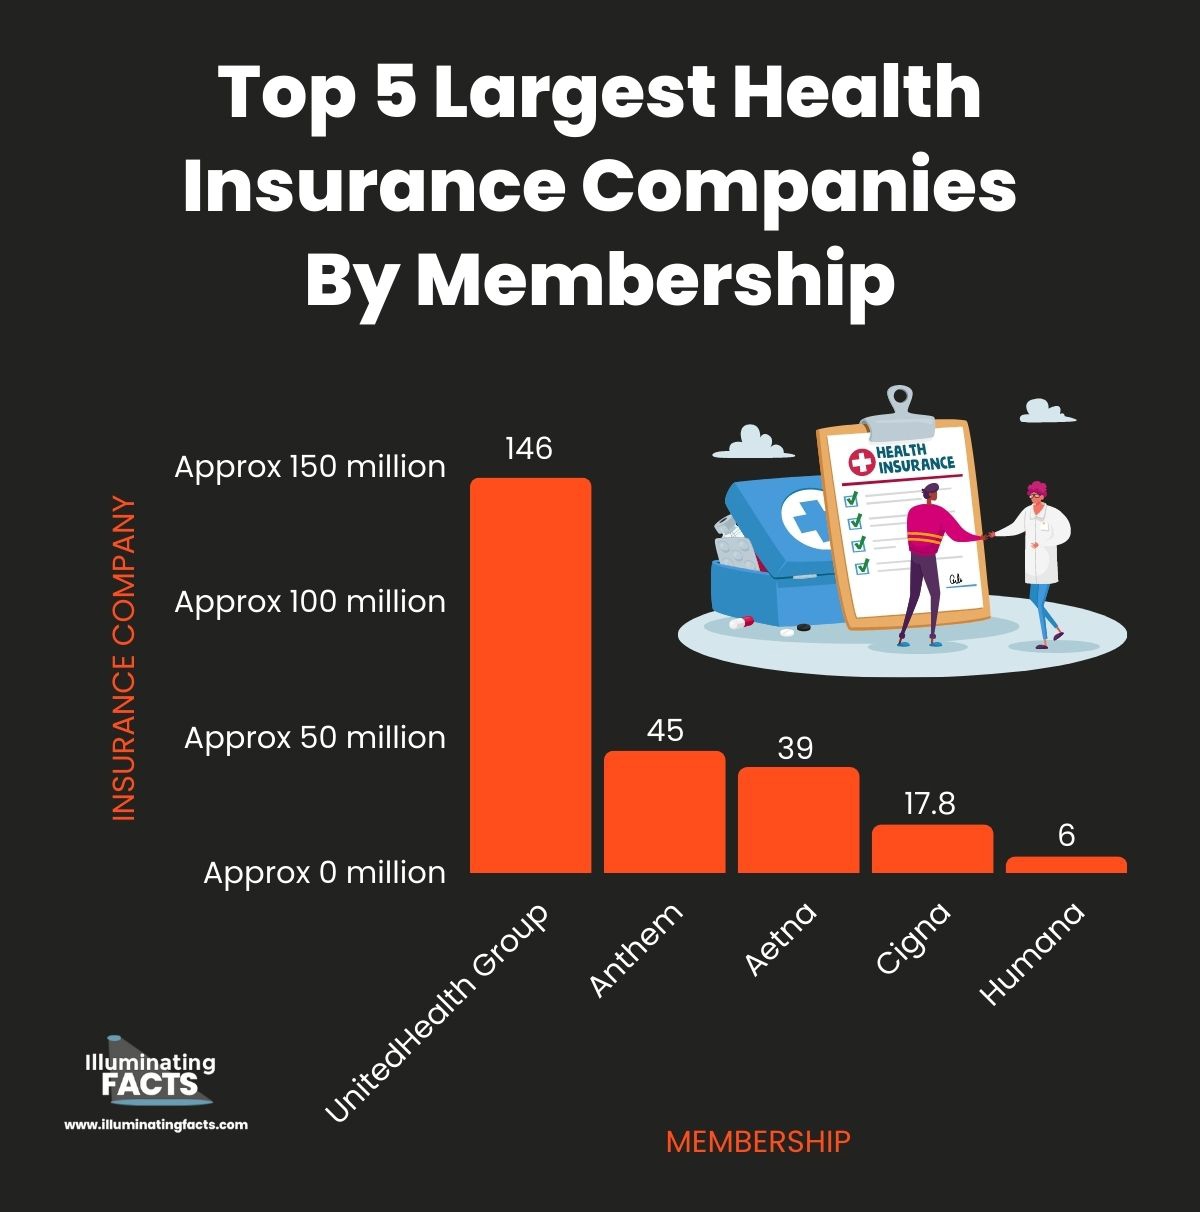 Top 5 Largest Health Insurance Companies By Membership